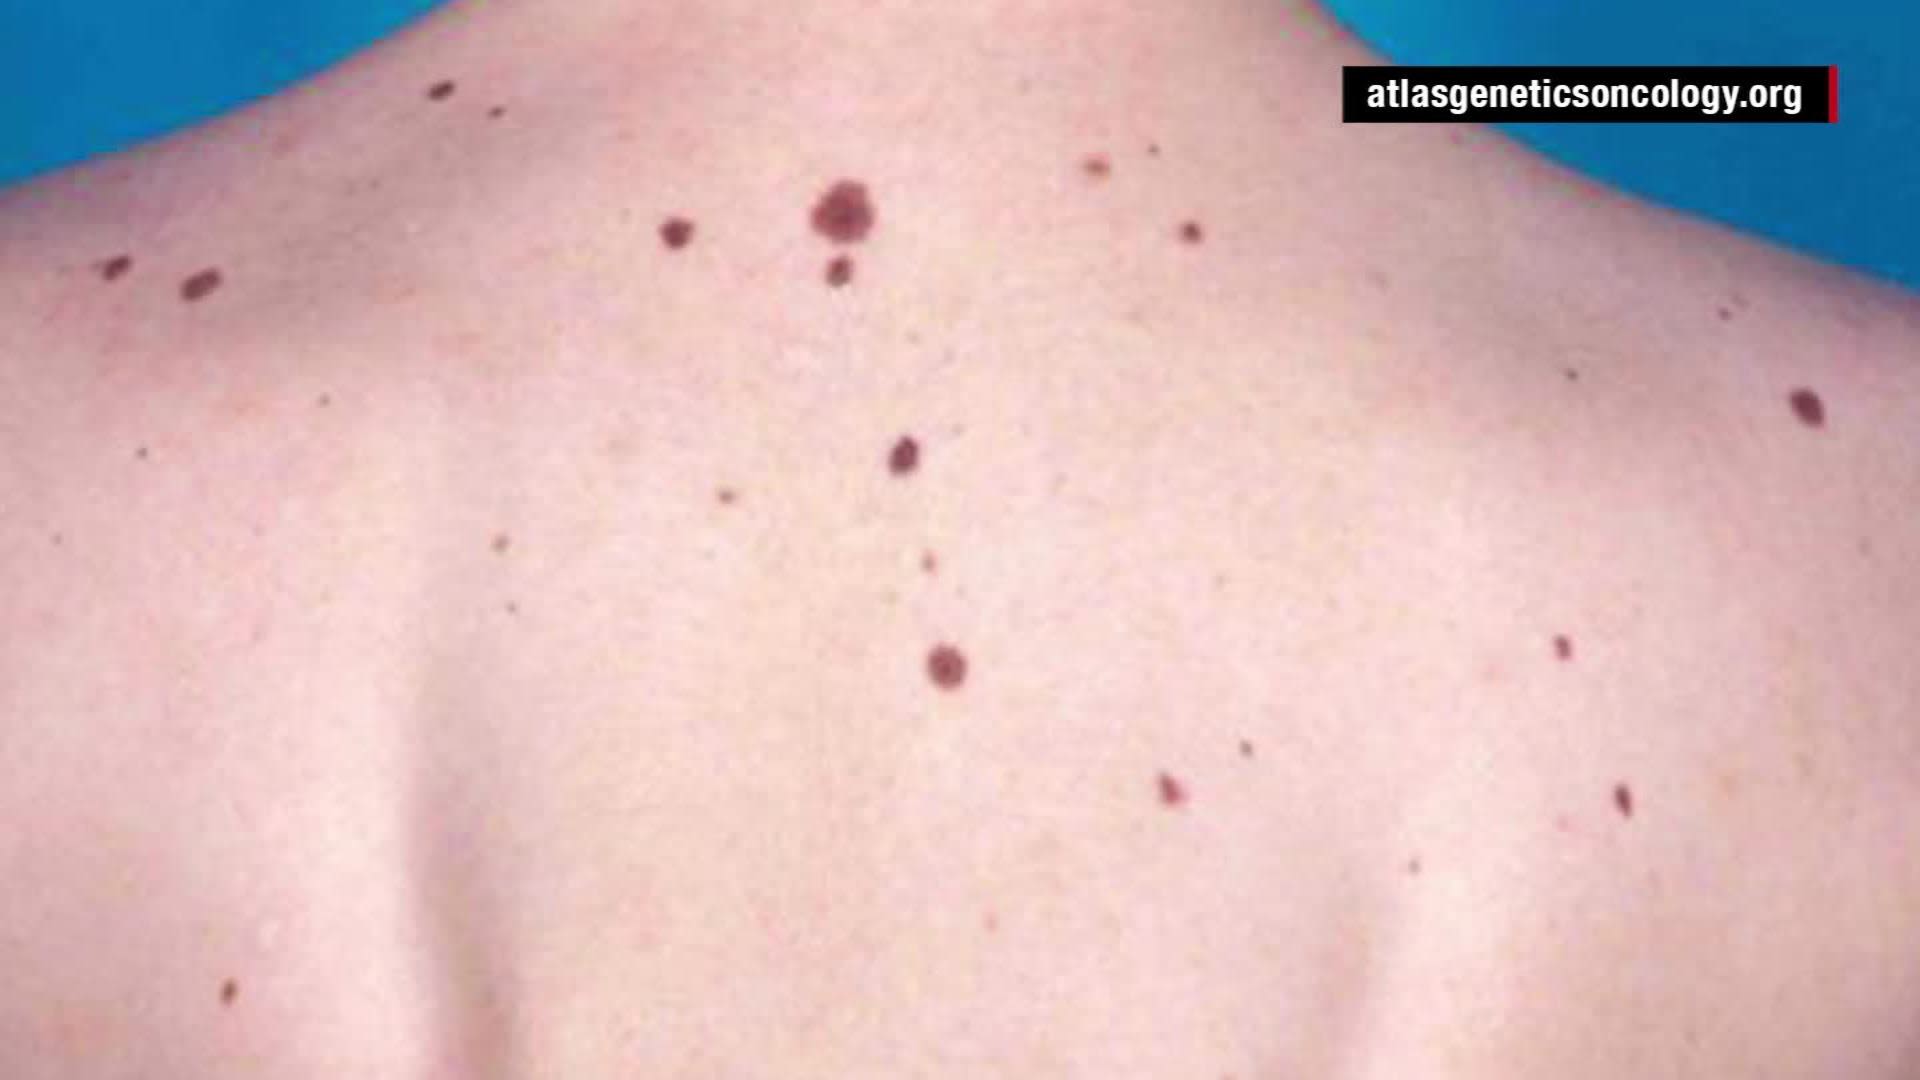 A Case of Skin Cancer, Science Take-Out